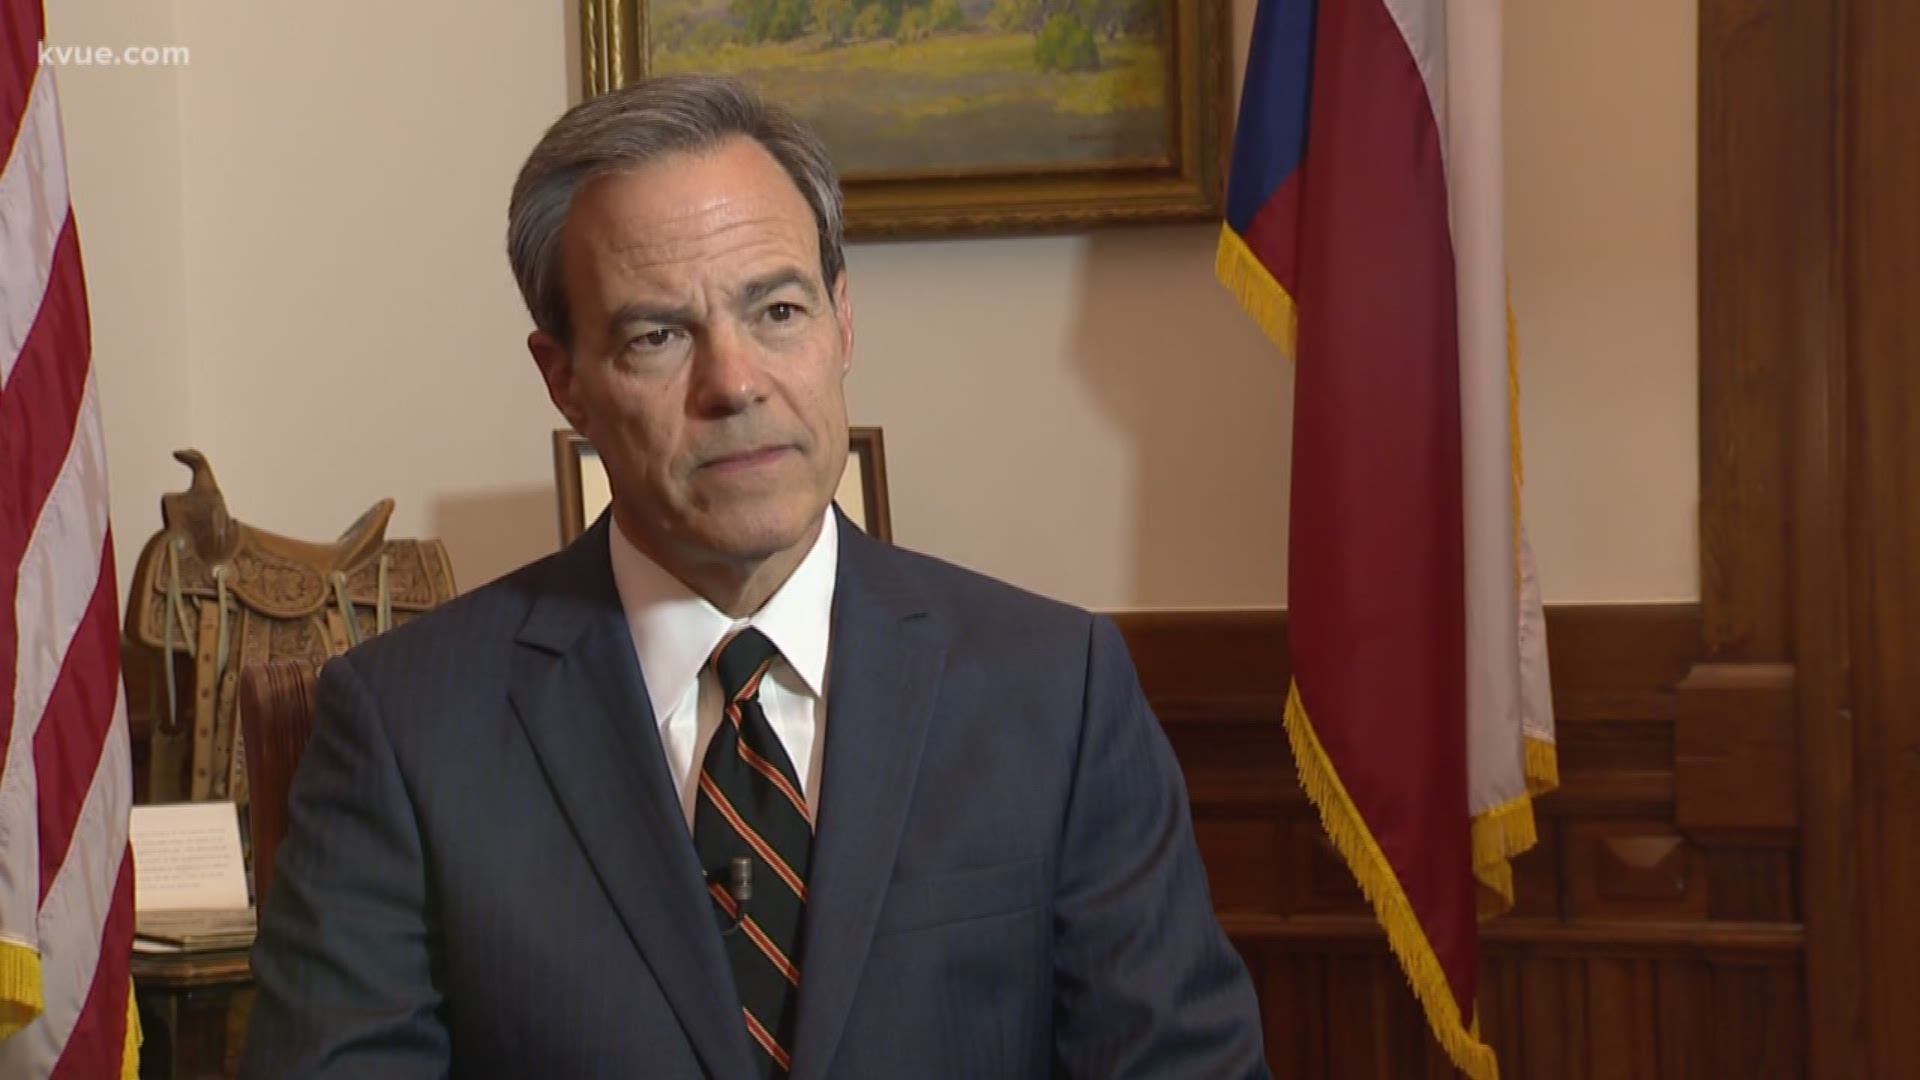 This week -- there was a major shake-up at the Capitol. Speaker of the House Joe Straus announced he will not run for re-election.